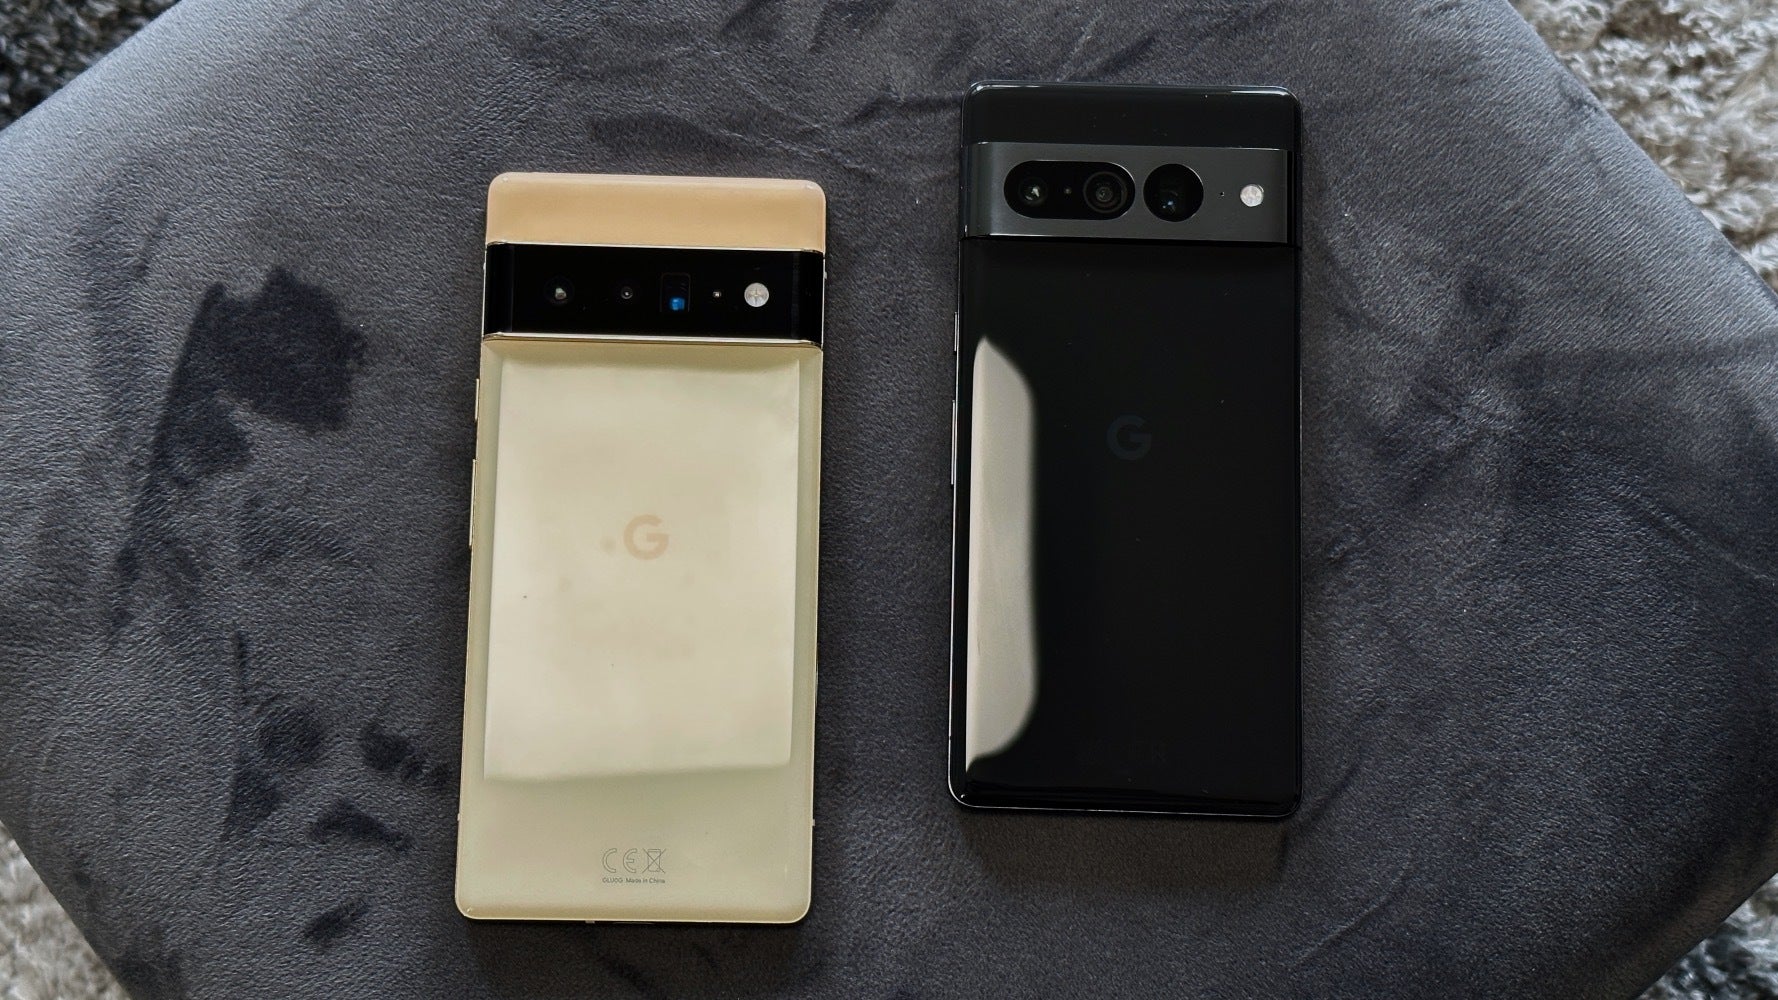 The Pixel 6 Pro in Sorta Sunny is the best-looking phone I've ever seen. The Pixel 7 Pro, on the other hand, wants to stand out with... camera holes. - Google gone mad! Scrapping iconic Pixel 6 design for basic Pixel 7 - a mistake Apple wouldn’t make